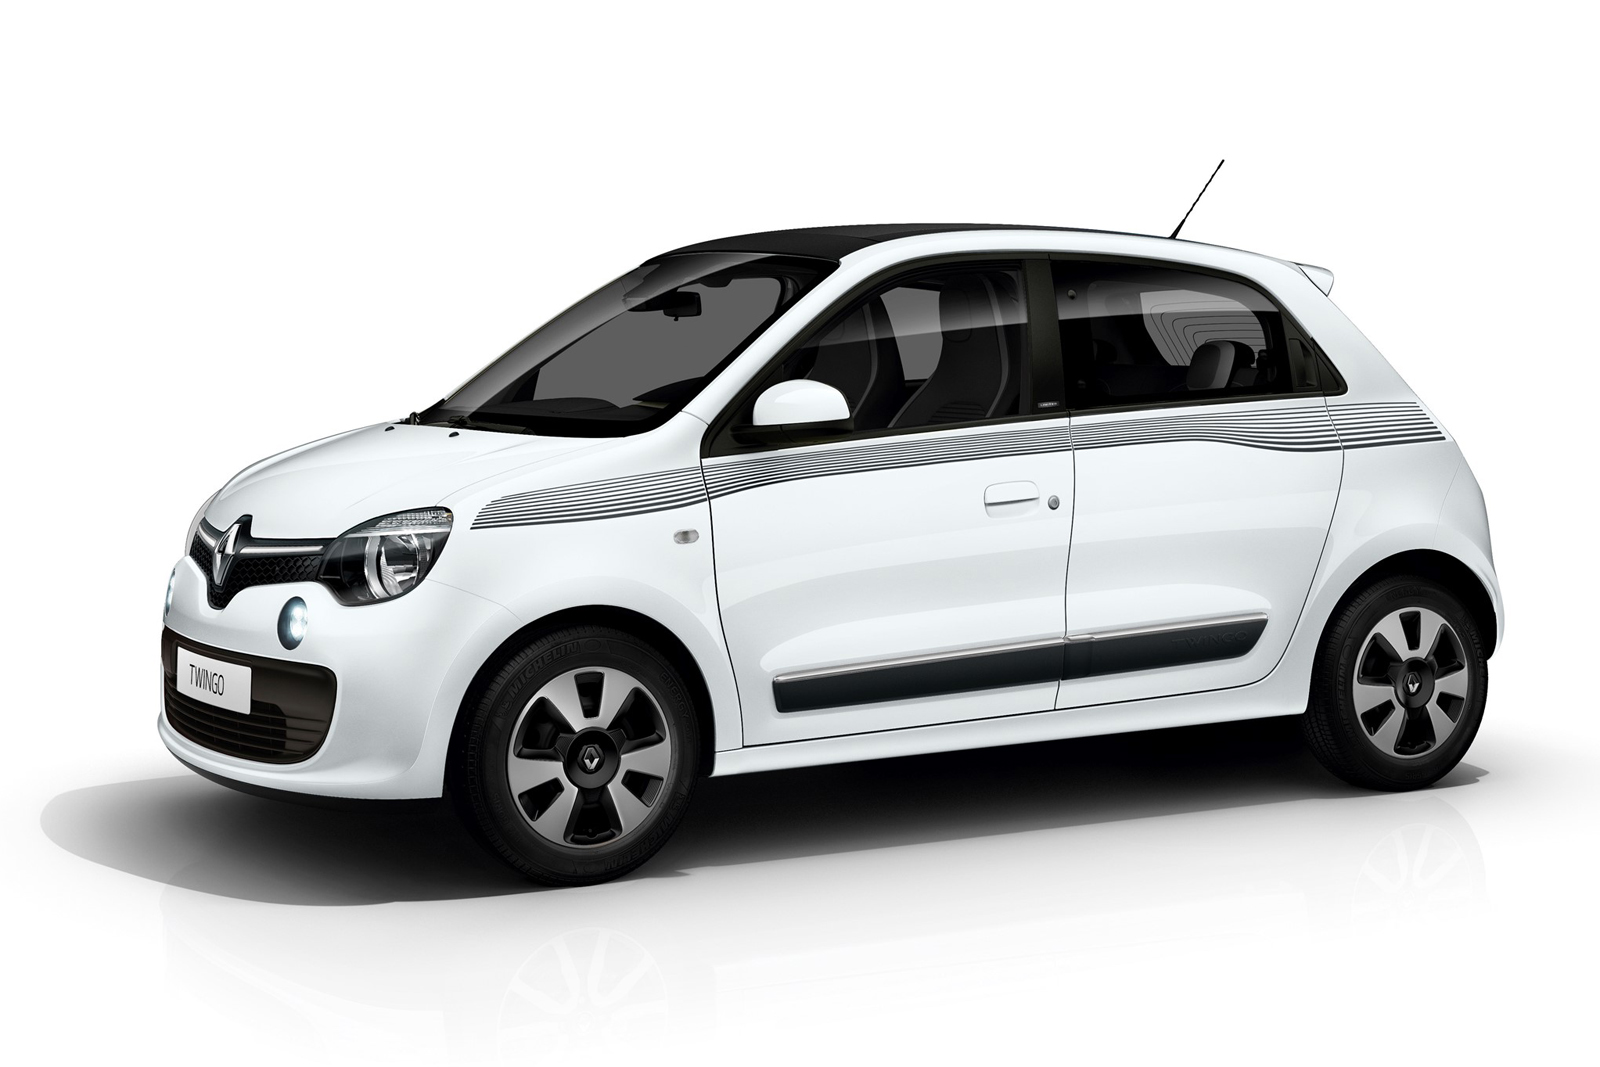 https://www.carscoops.com/wp-content/uploads/2015/06/1d8dbe90-renault-twingo-limited-2.jpg